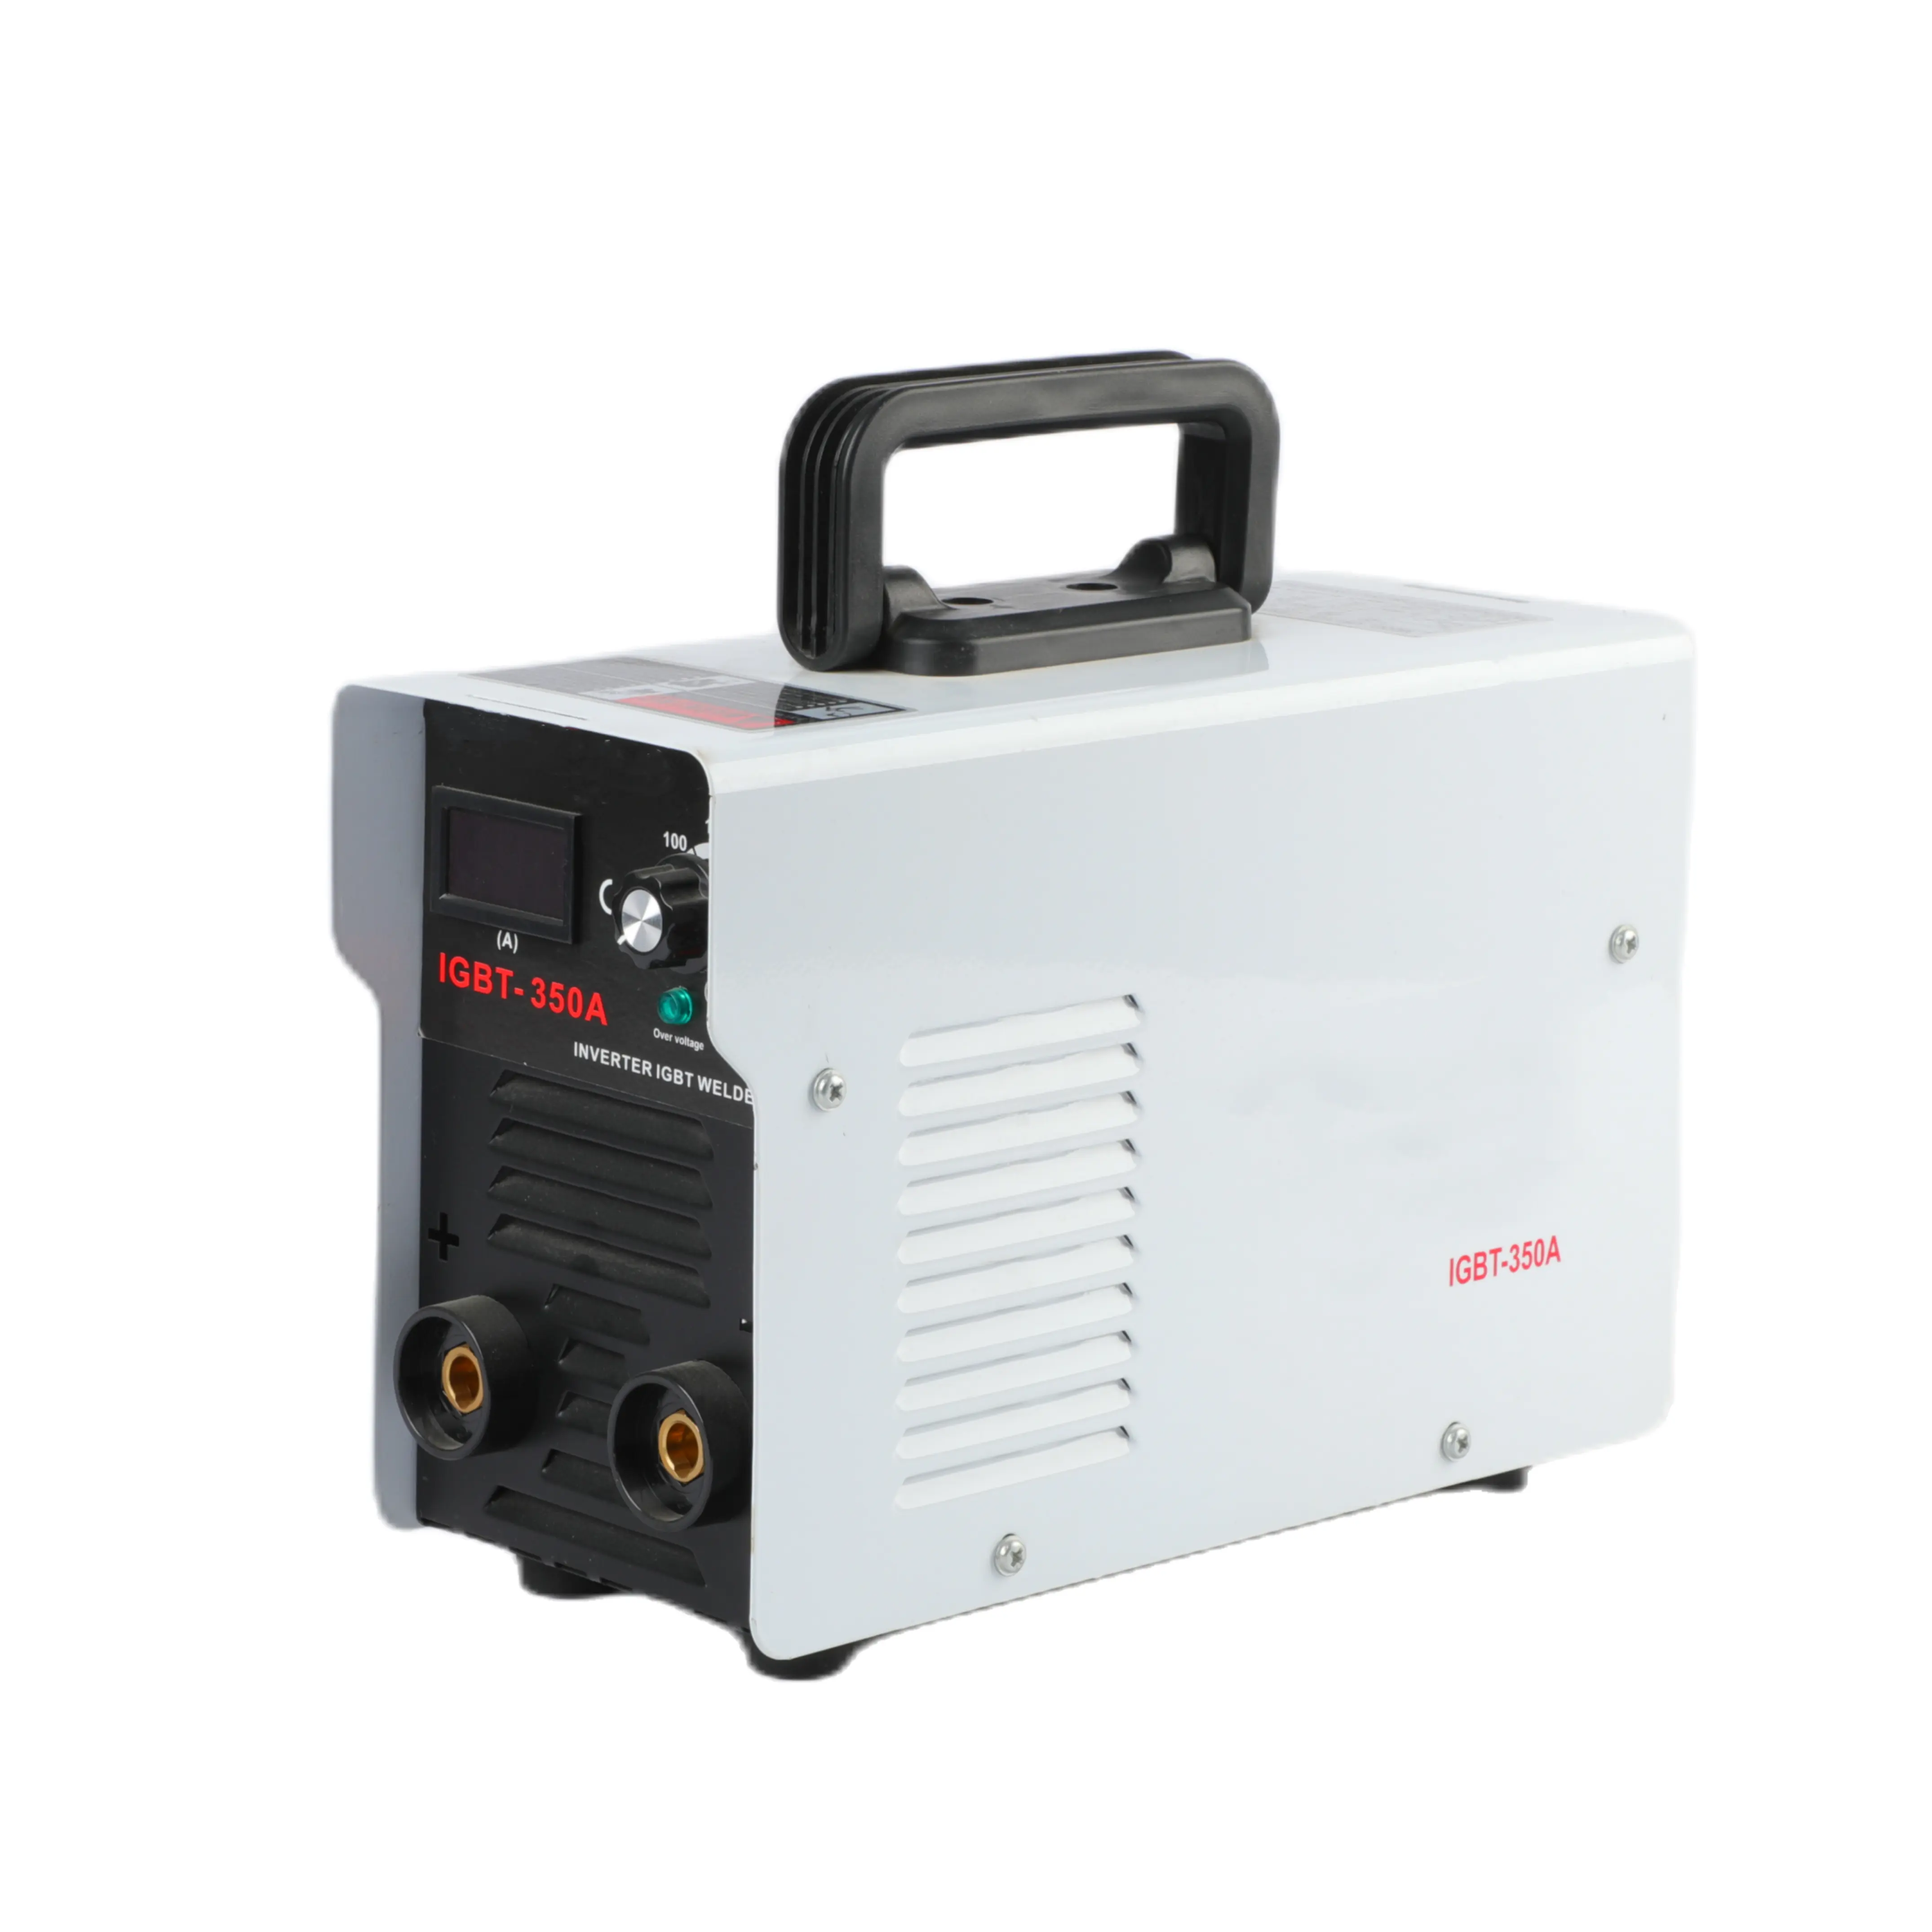 Sell well Professional IGBT Electric DC Inverter ARC hand soldering MMA-200 welding machine